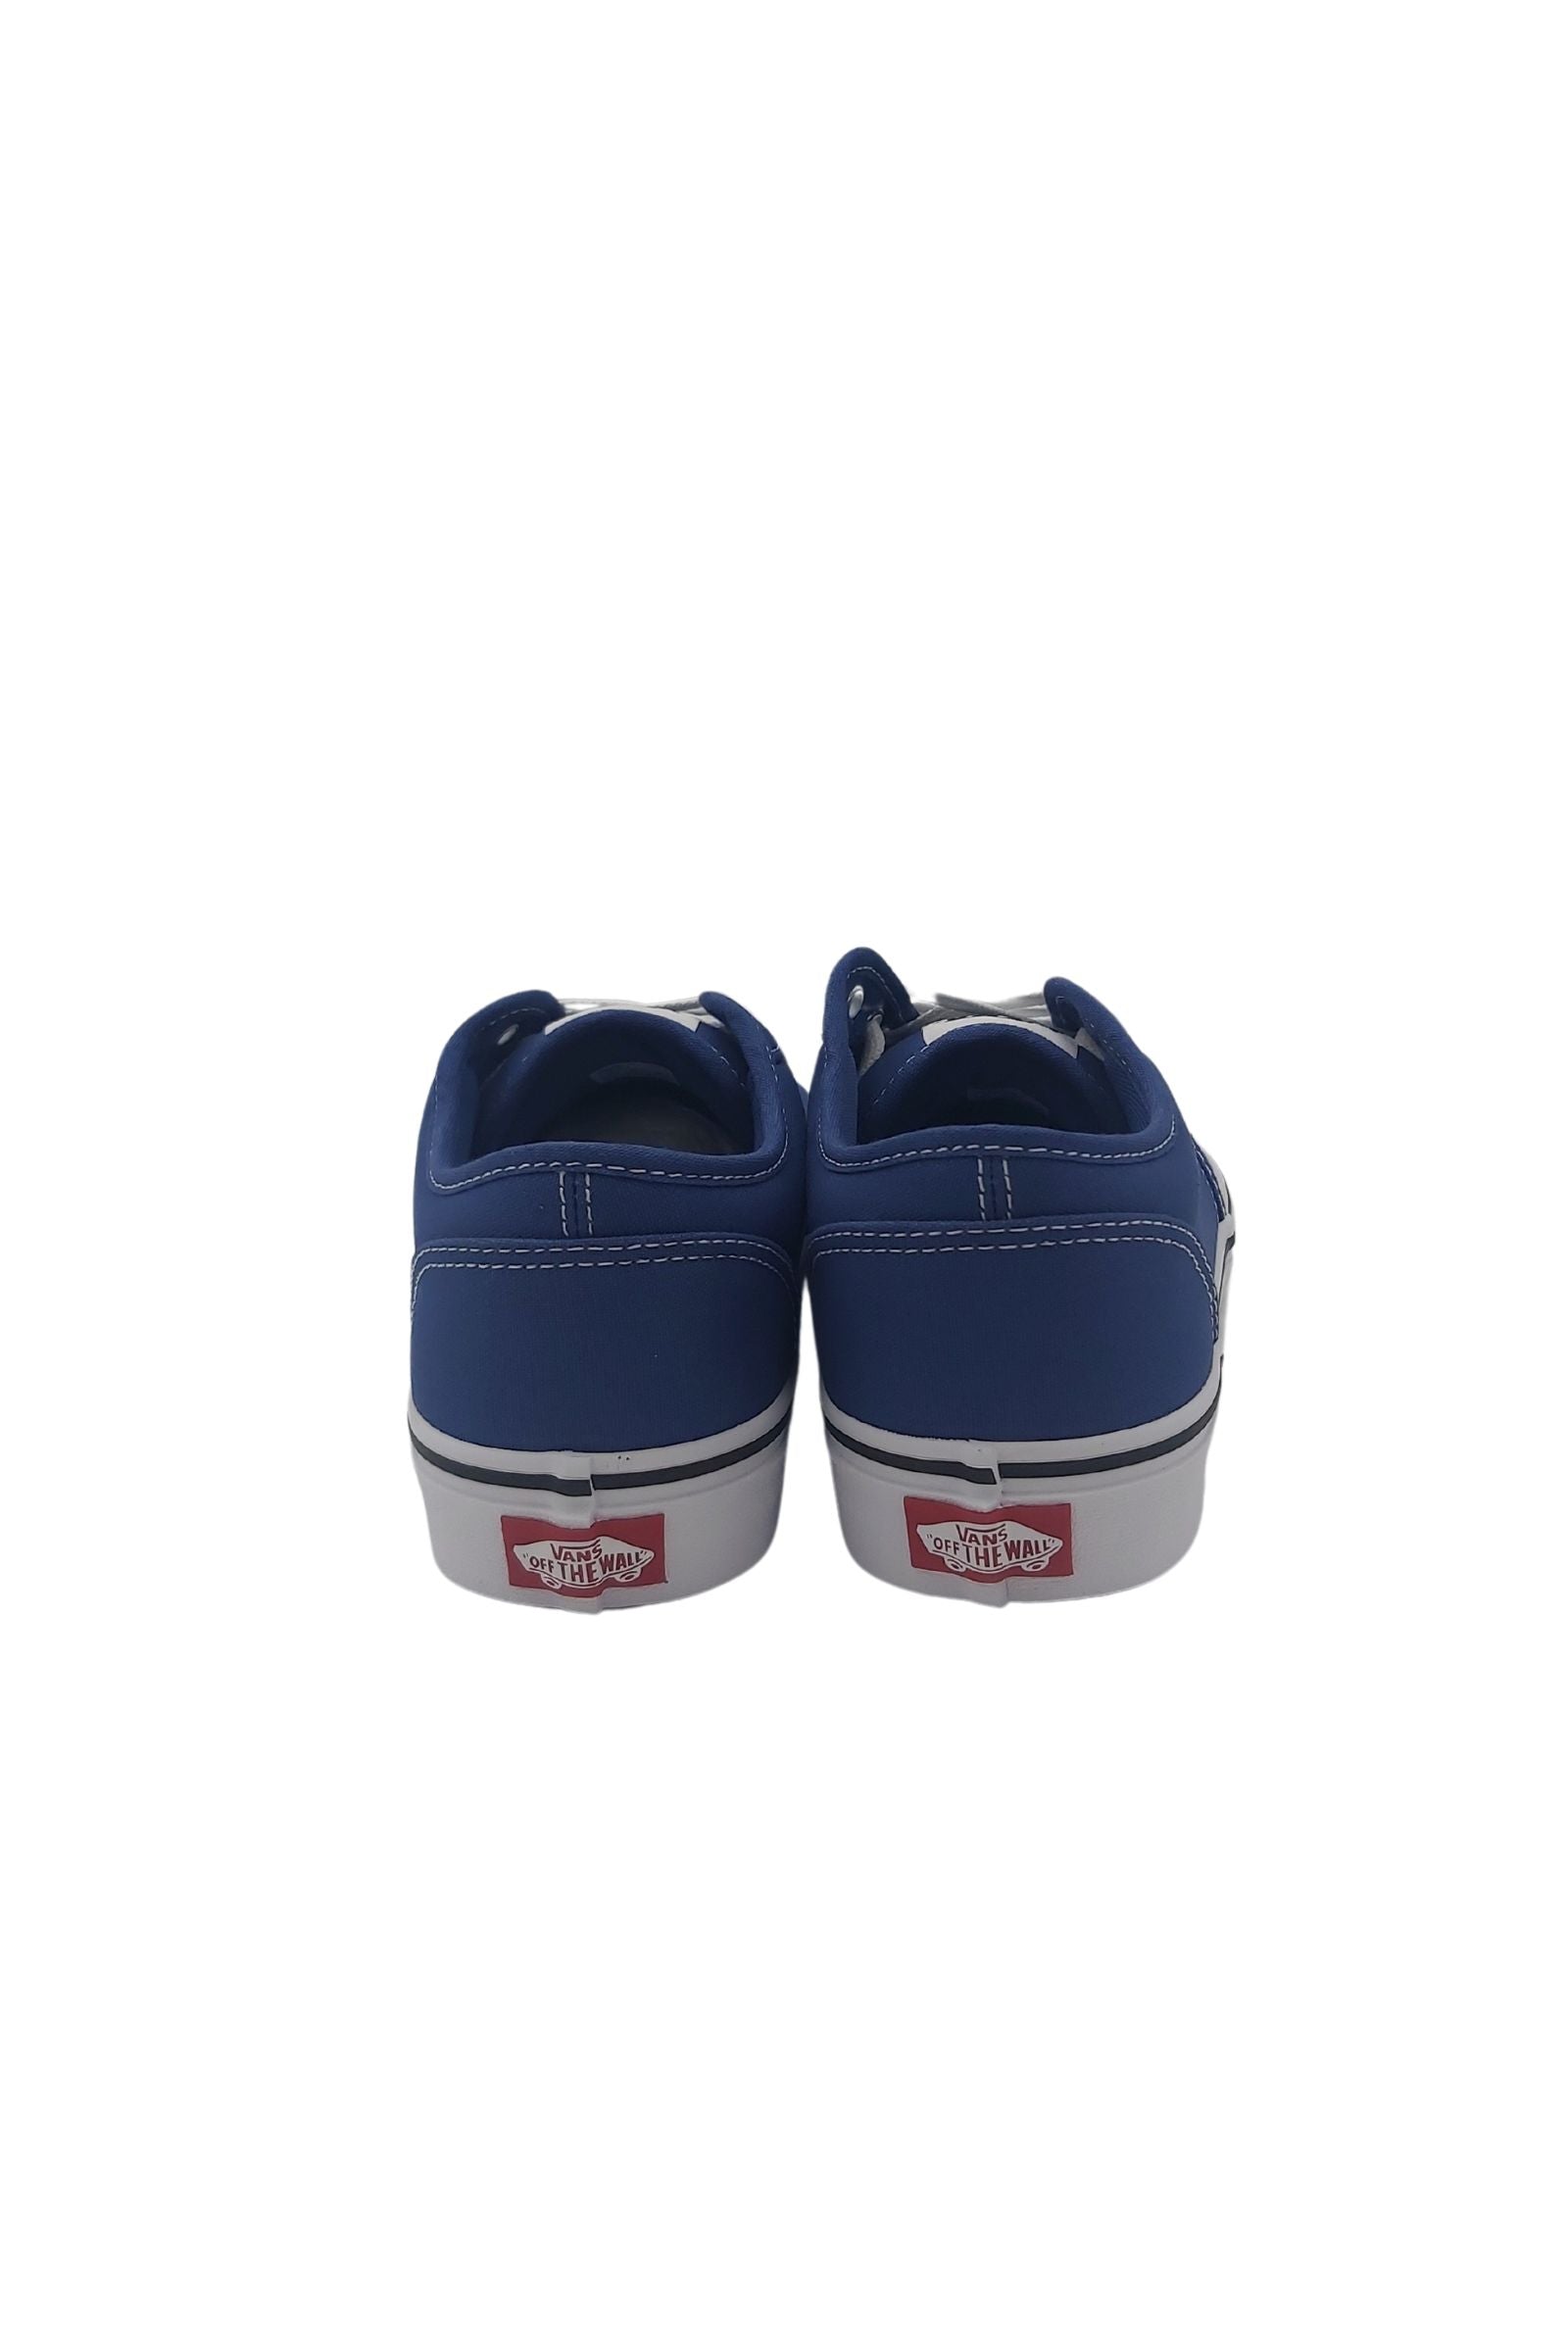 Mens Atwood Blue/White Sneaker-Back View